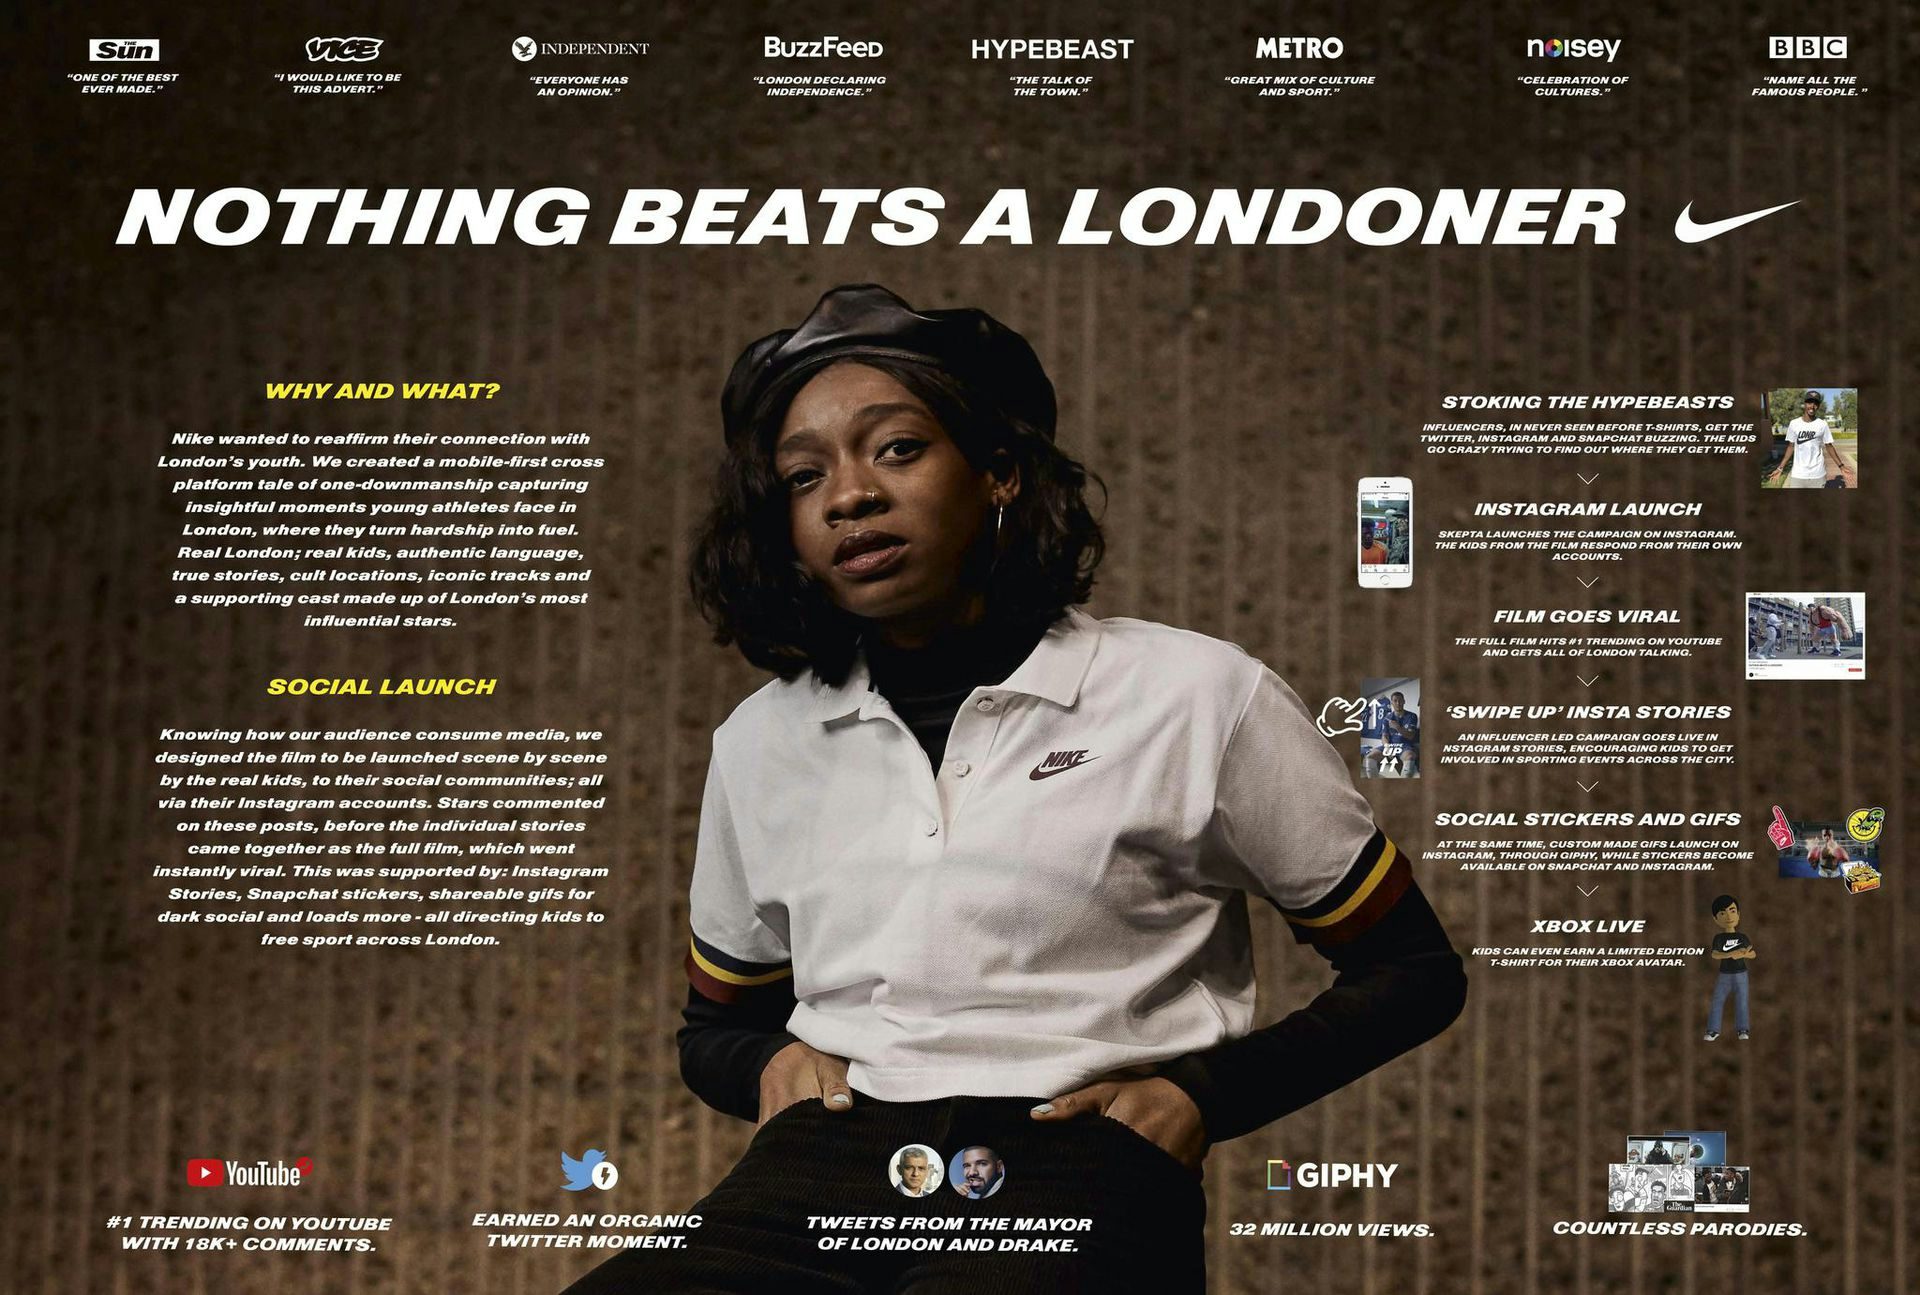 Cannes Lions Creative Data Awards: the winners